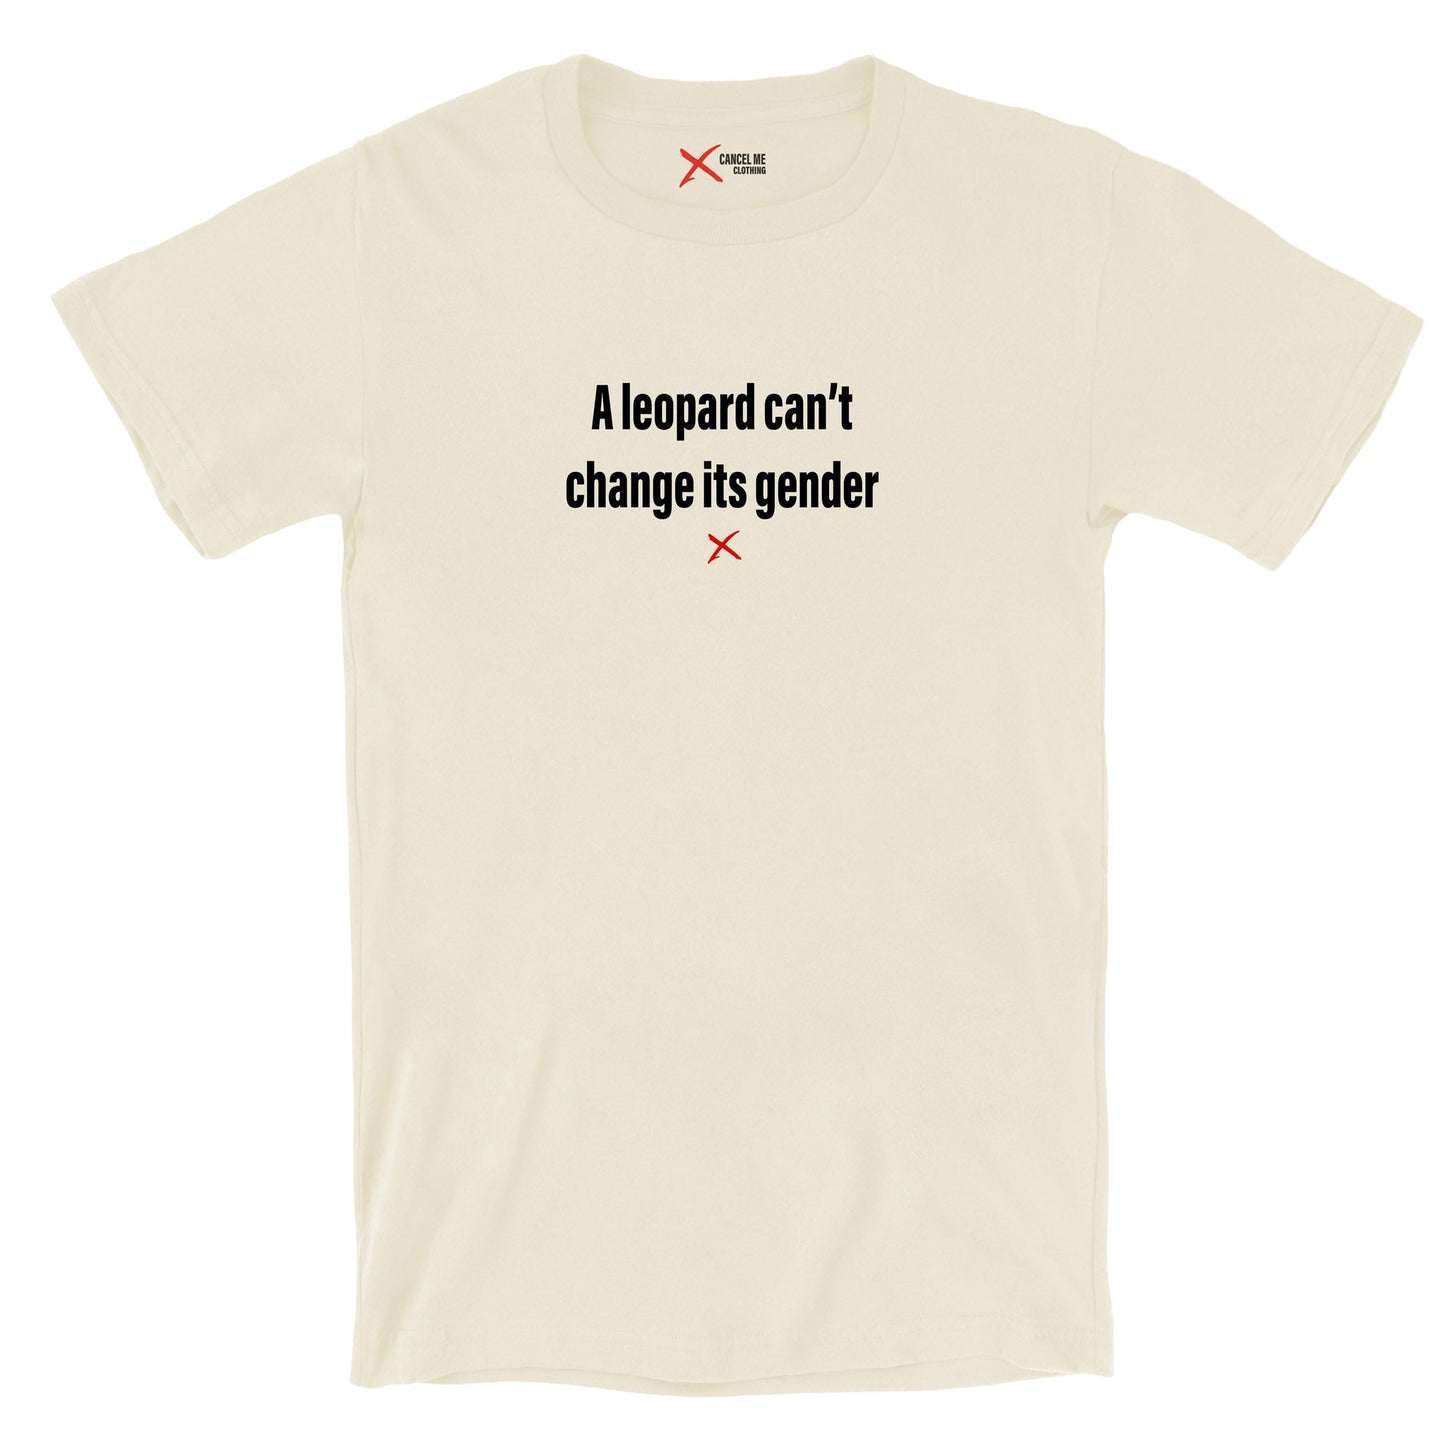 A leopard can't change its gender - Shirt